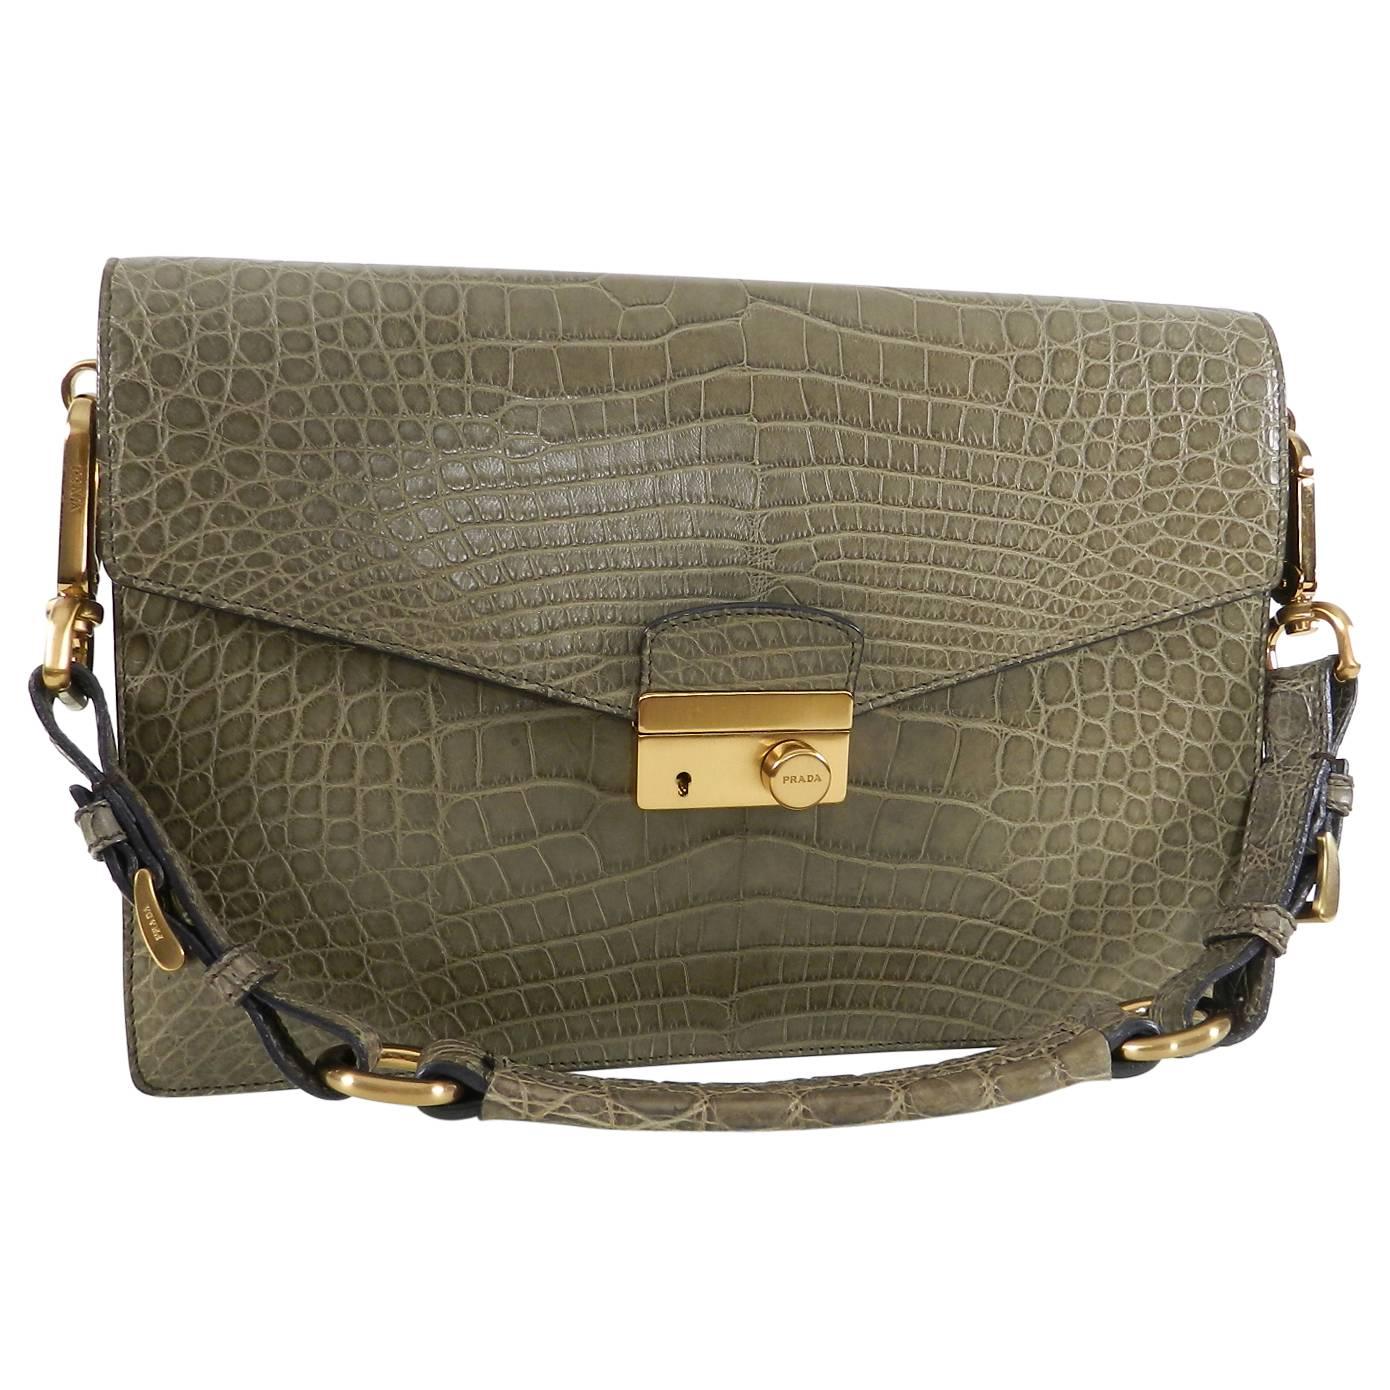 Prada Crocodile Sound Bag with Matte Gold Hardware.  Short shoulder strap, front lock, burgundy leather lined interior.  Body of bag measures about 11.75 x 8 x 3” with a 7” strap drop.  Excellent pre-owned – only carried a few times.  Includes